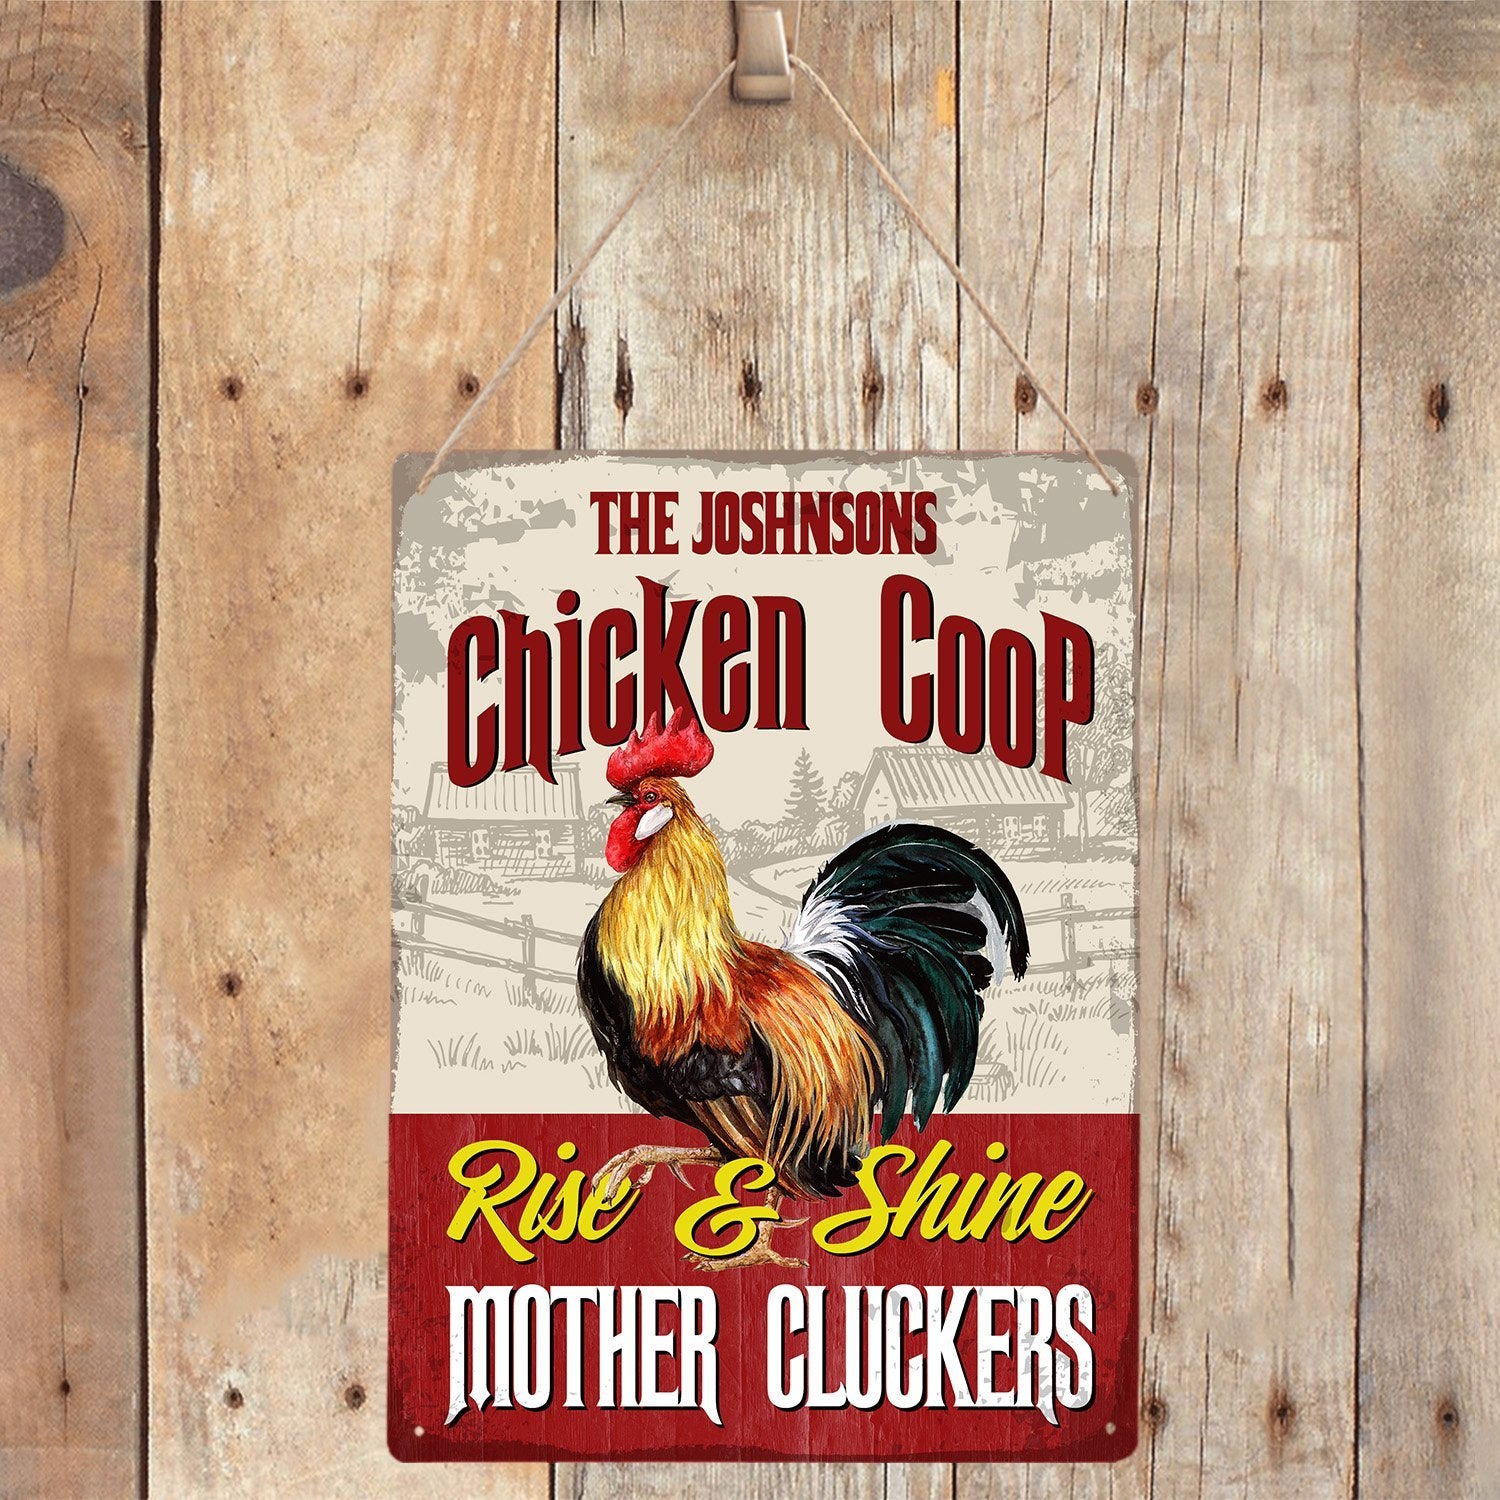 Chicken Coop Sign, Rise And Shine, Custom Farm Sign